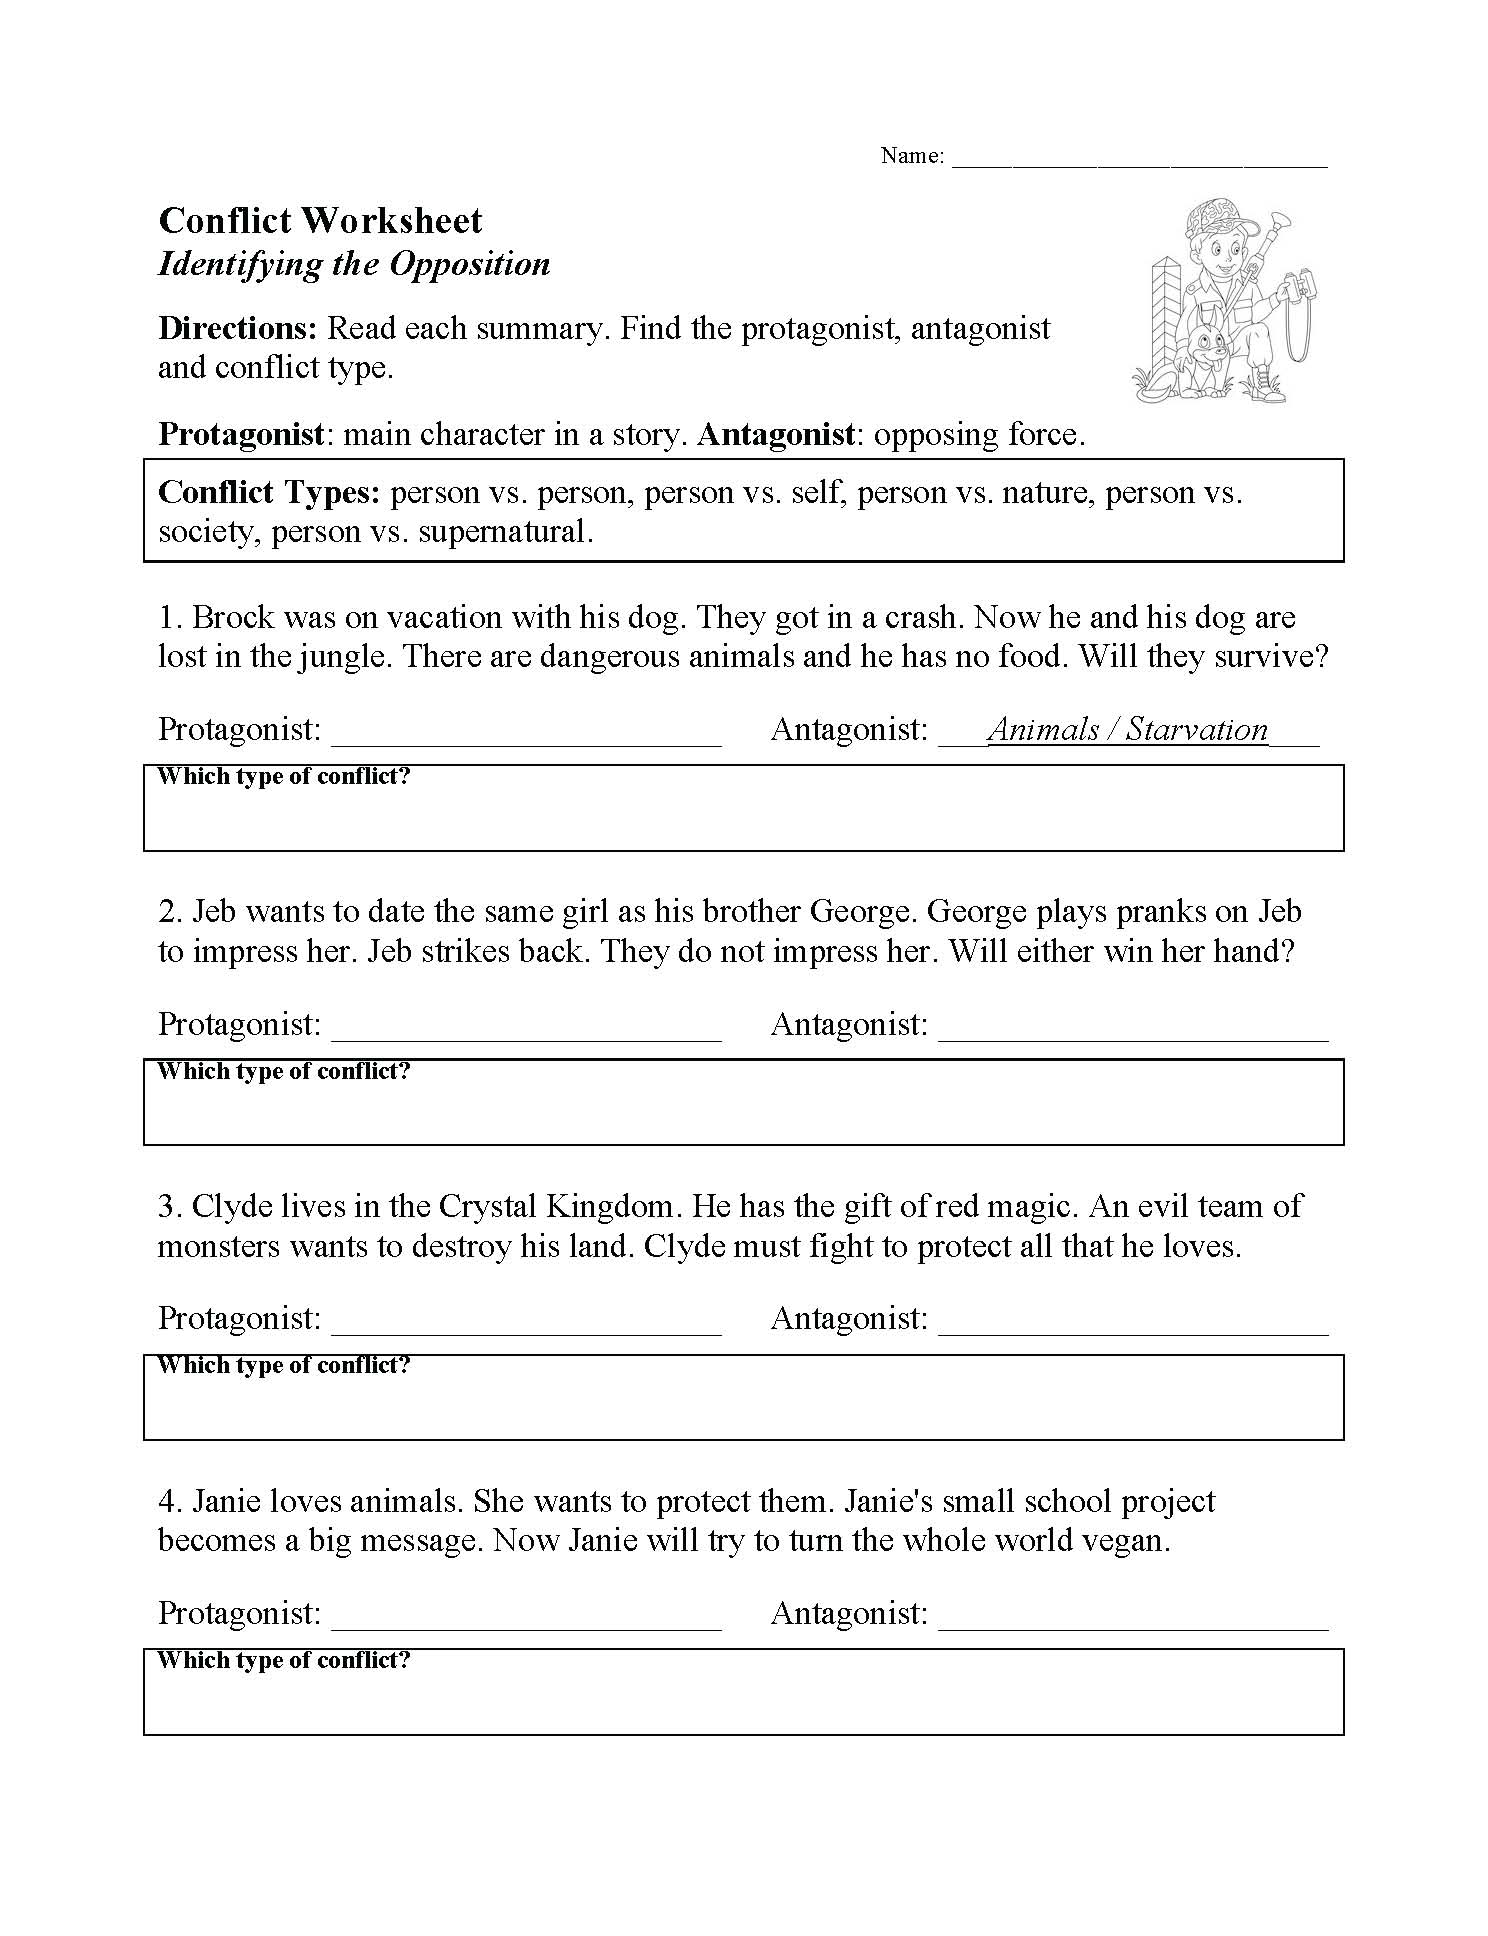 Elements of Fiction Worksheets  Free for Primary Grades With Types Of Conflict Worksheet